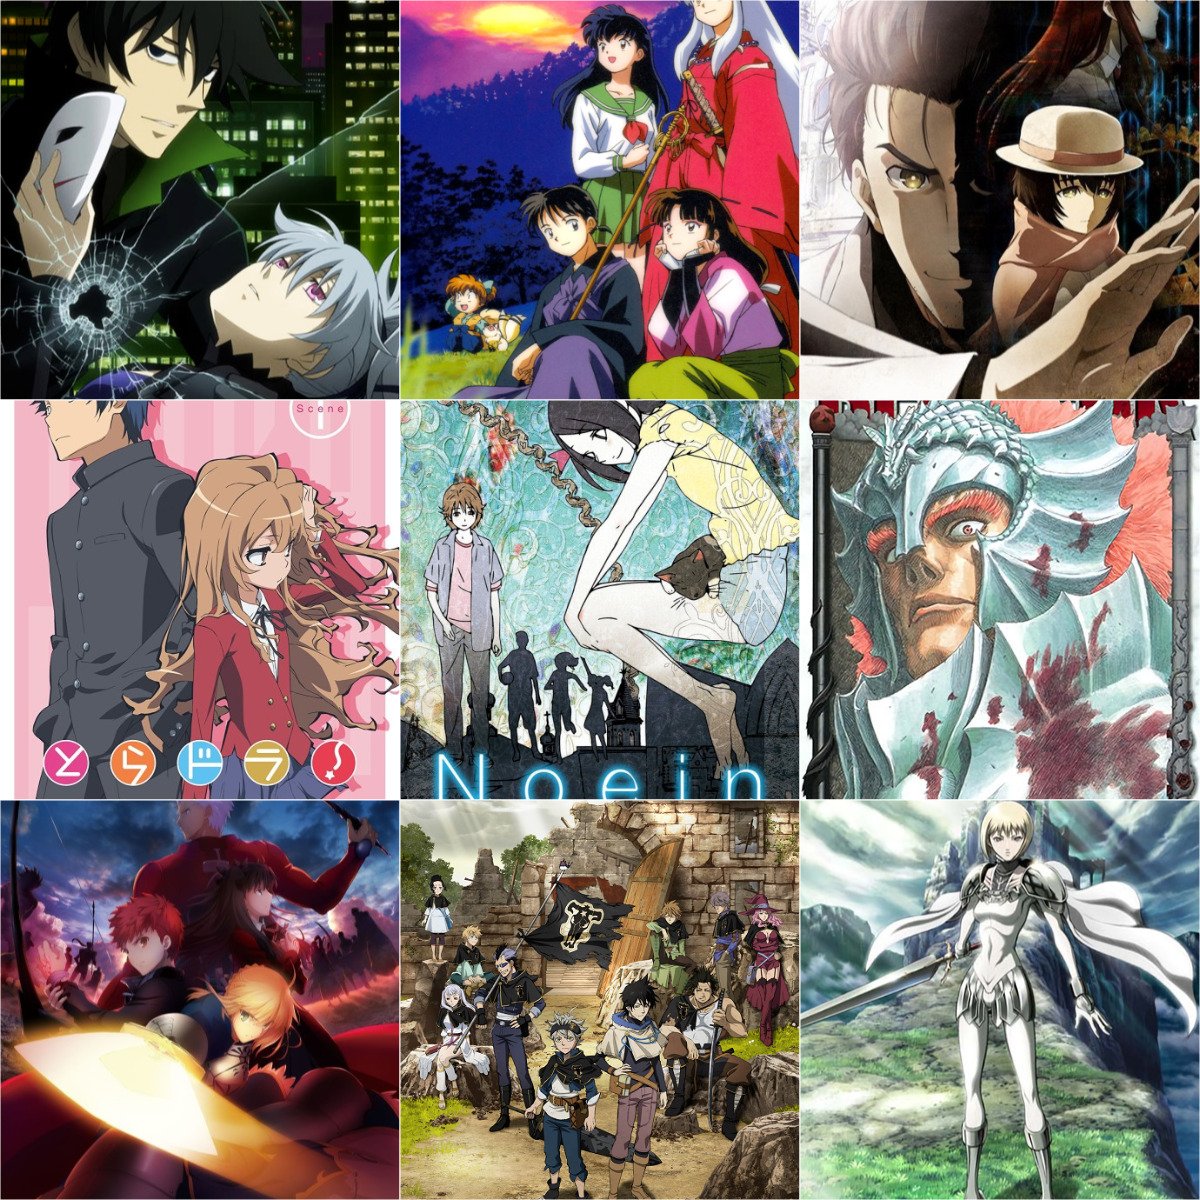 Joining in on the trend, my 3x3 : r/MyAnimeList